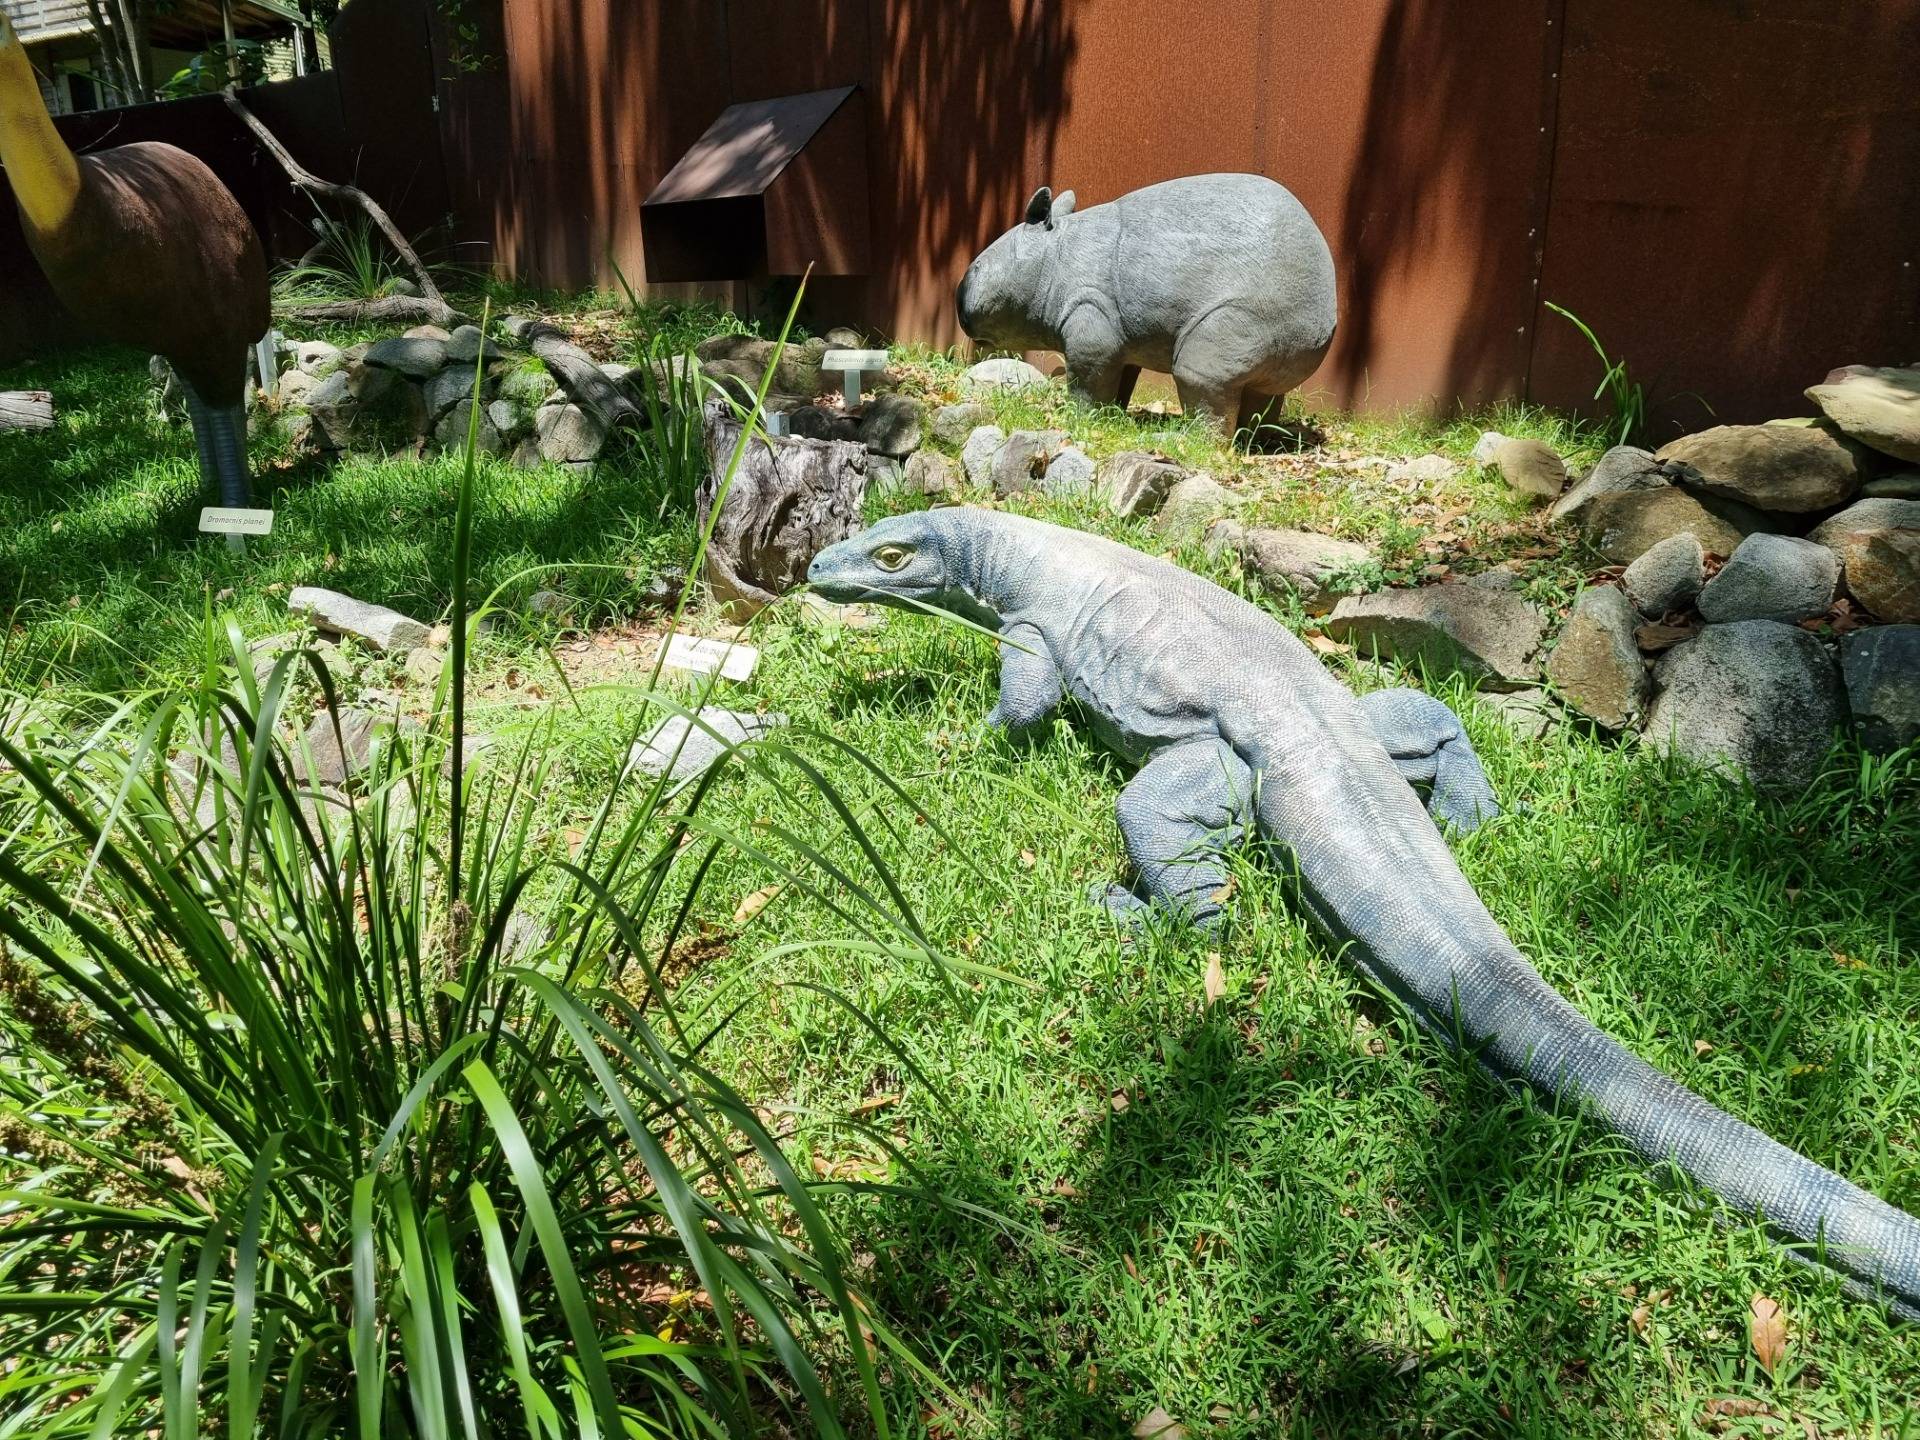 Models of some of the other giant megafauna (animals) that used to roam around Australia including a giant kind of wombat (at the back) and a supersized lizard (at the front).